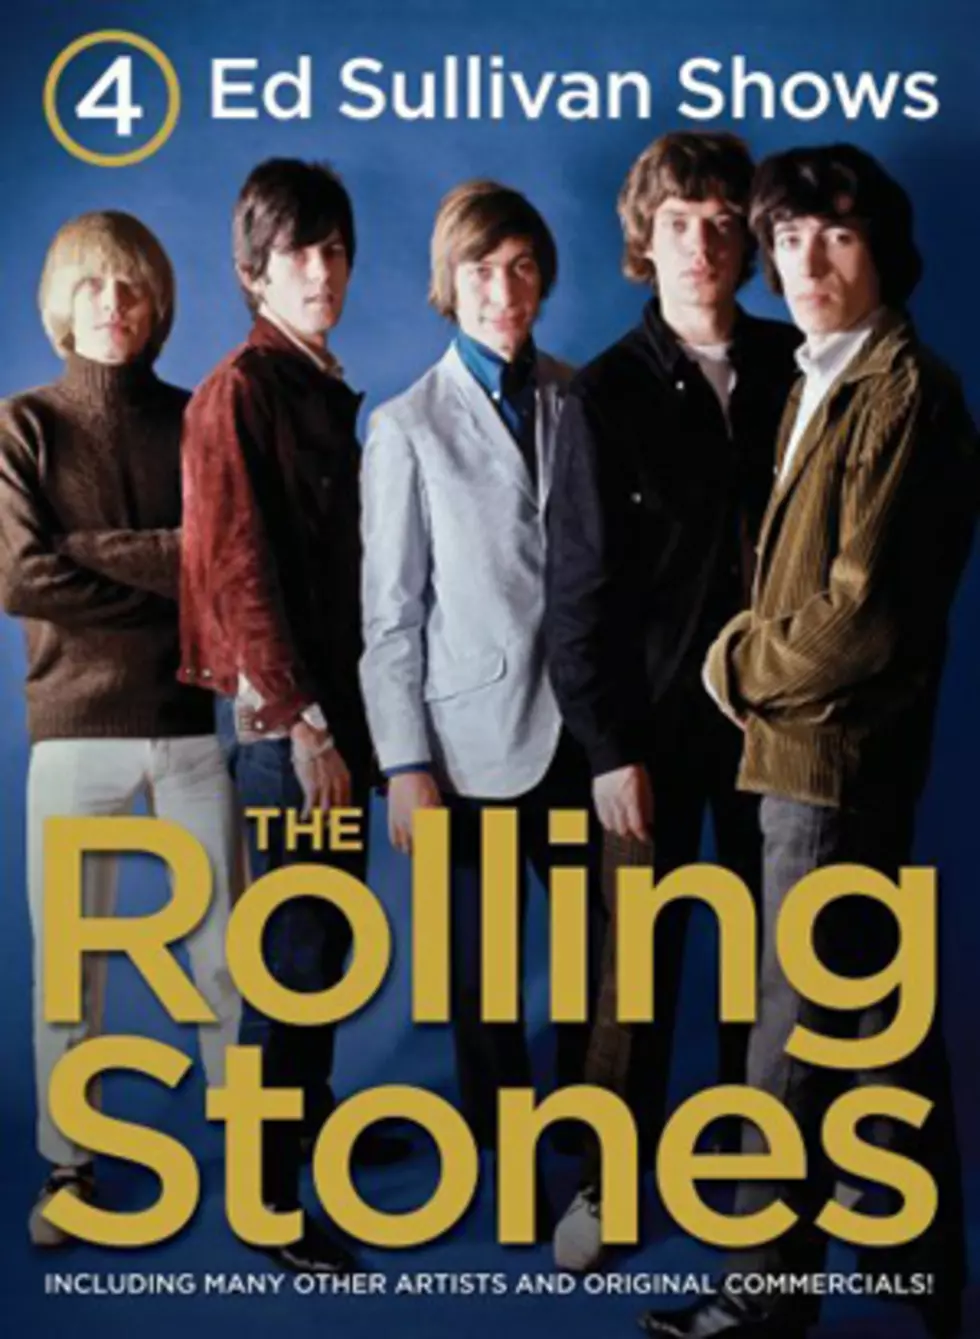 Win &#8216;4 Ed Sullivan Shows Starring the Rolling Stones&#8217; on DVD